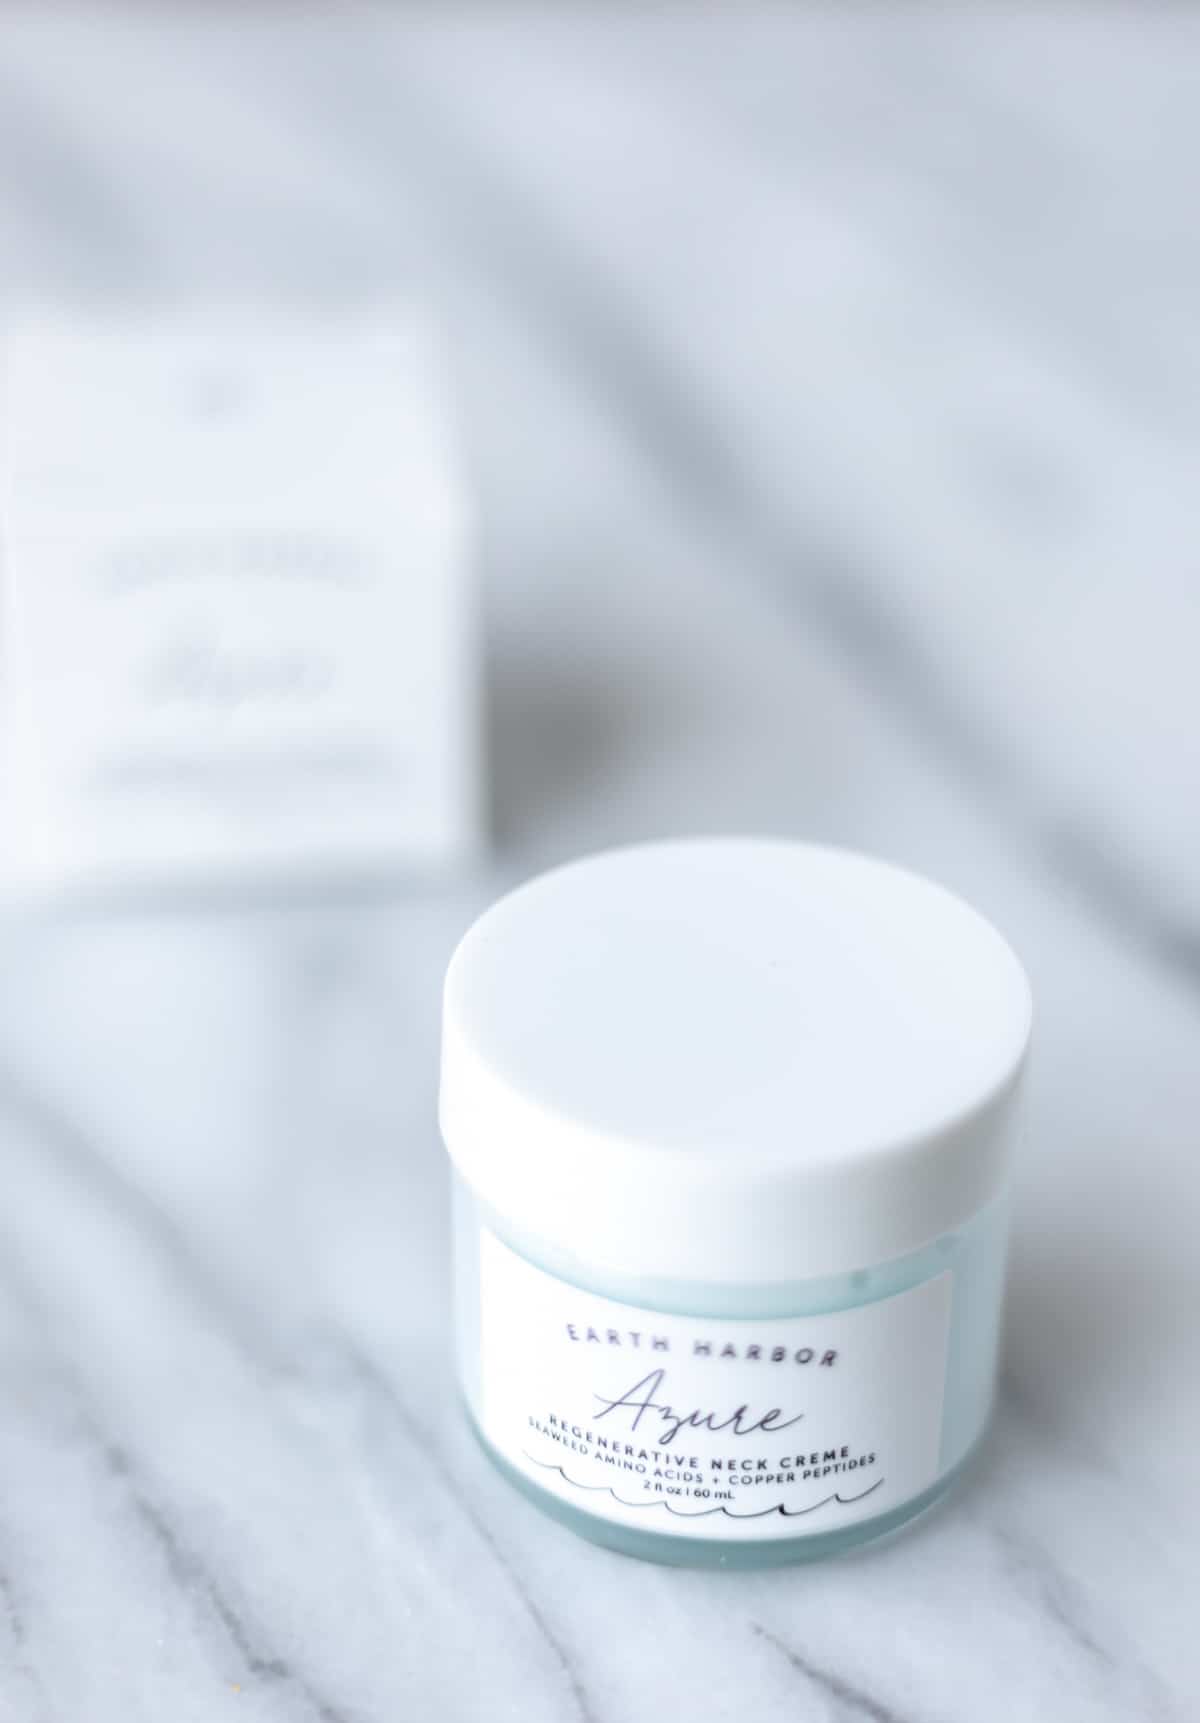 A jar of Earth Harbor Azure Regenerative Neck Cream with the box behind it.